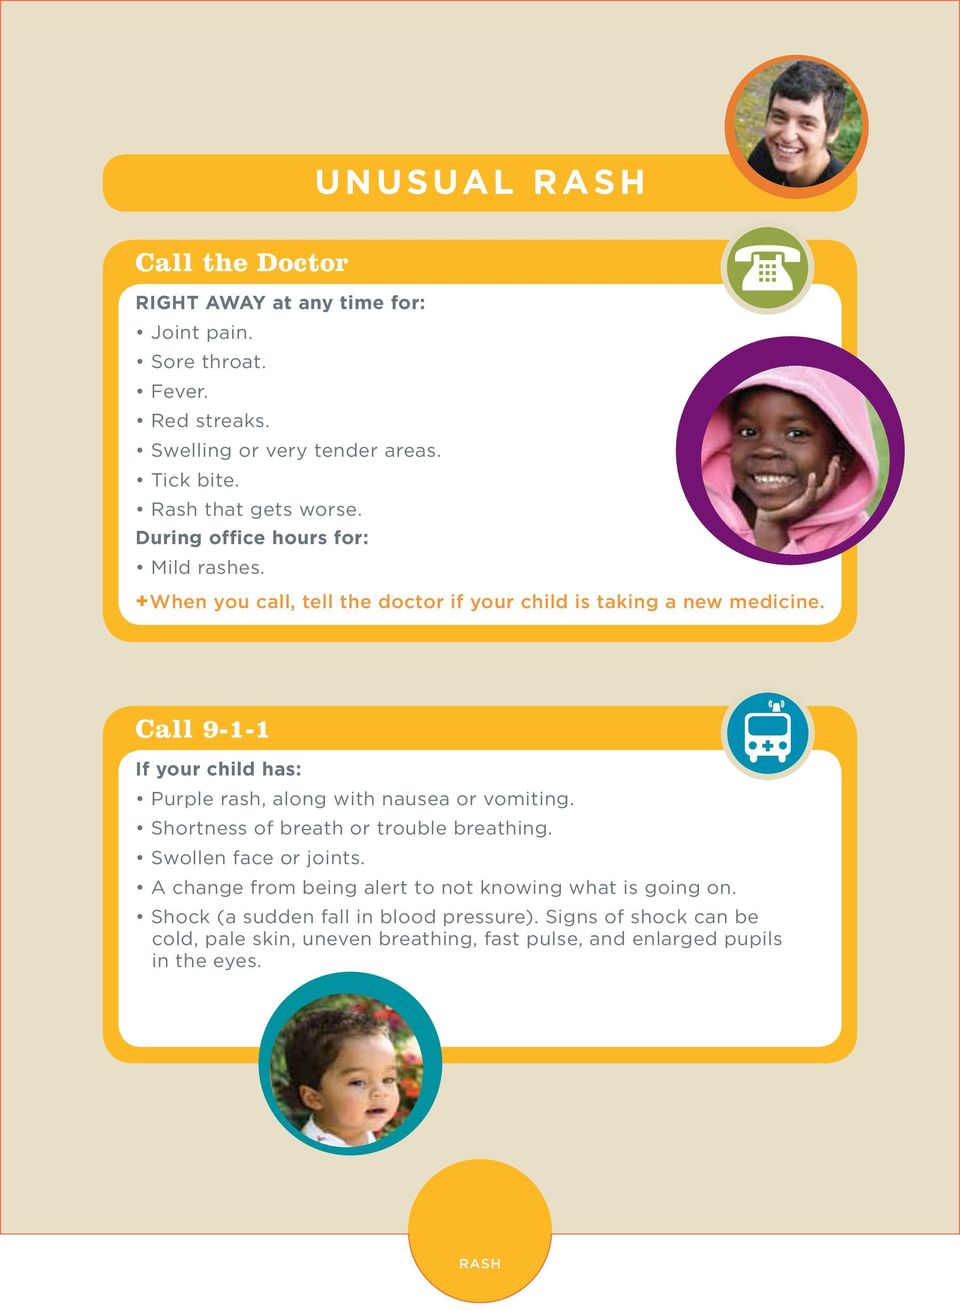 Call 9-1-1 If your child has: Purple rash, along with nausea or vomiting. Shortness of breath or trouble breathing. Swollen face or joints.